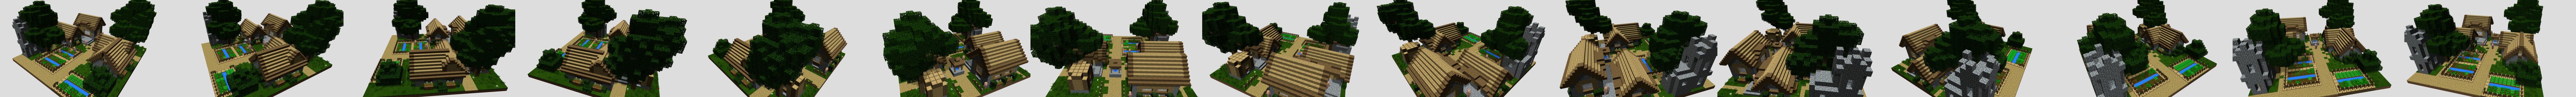 The Village(lego minecraft) - Download Free 3D model by ric